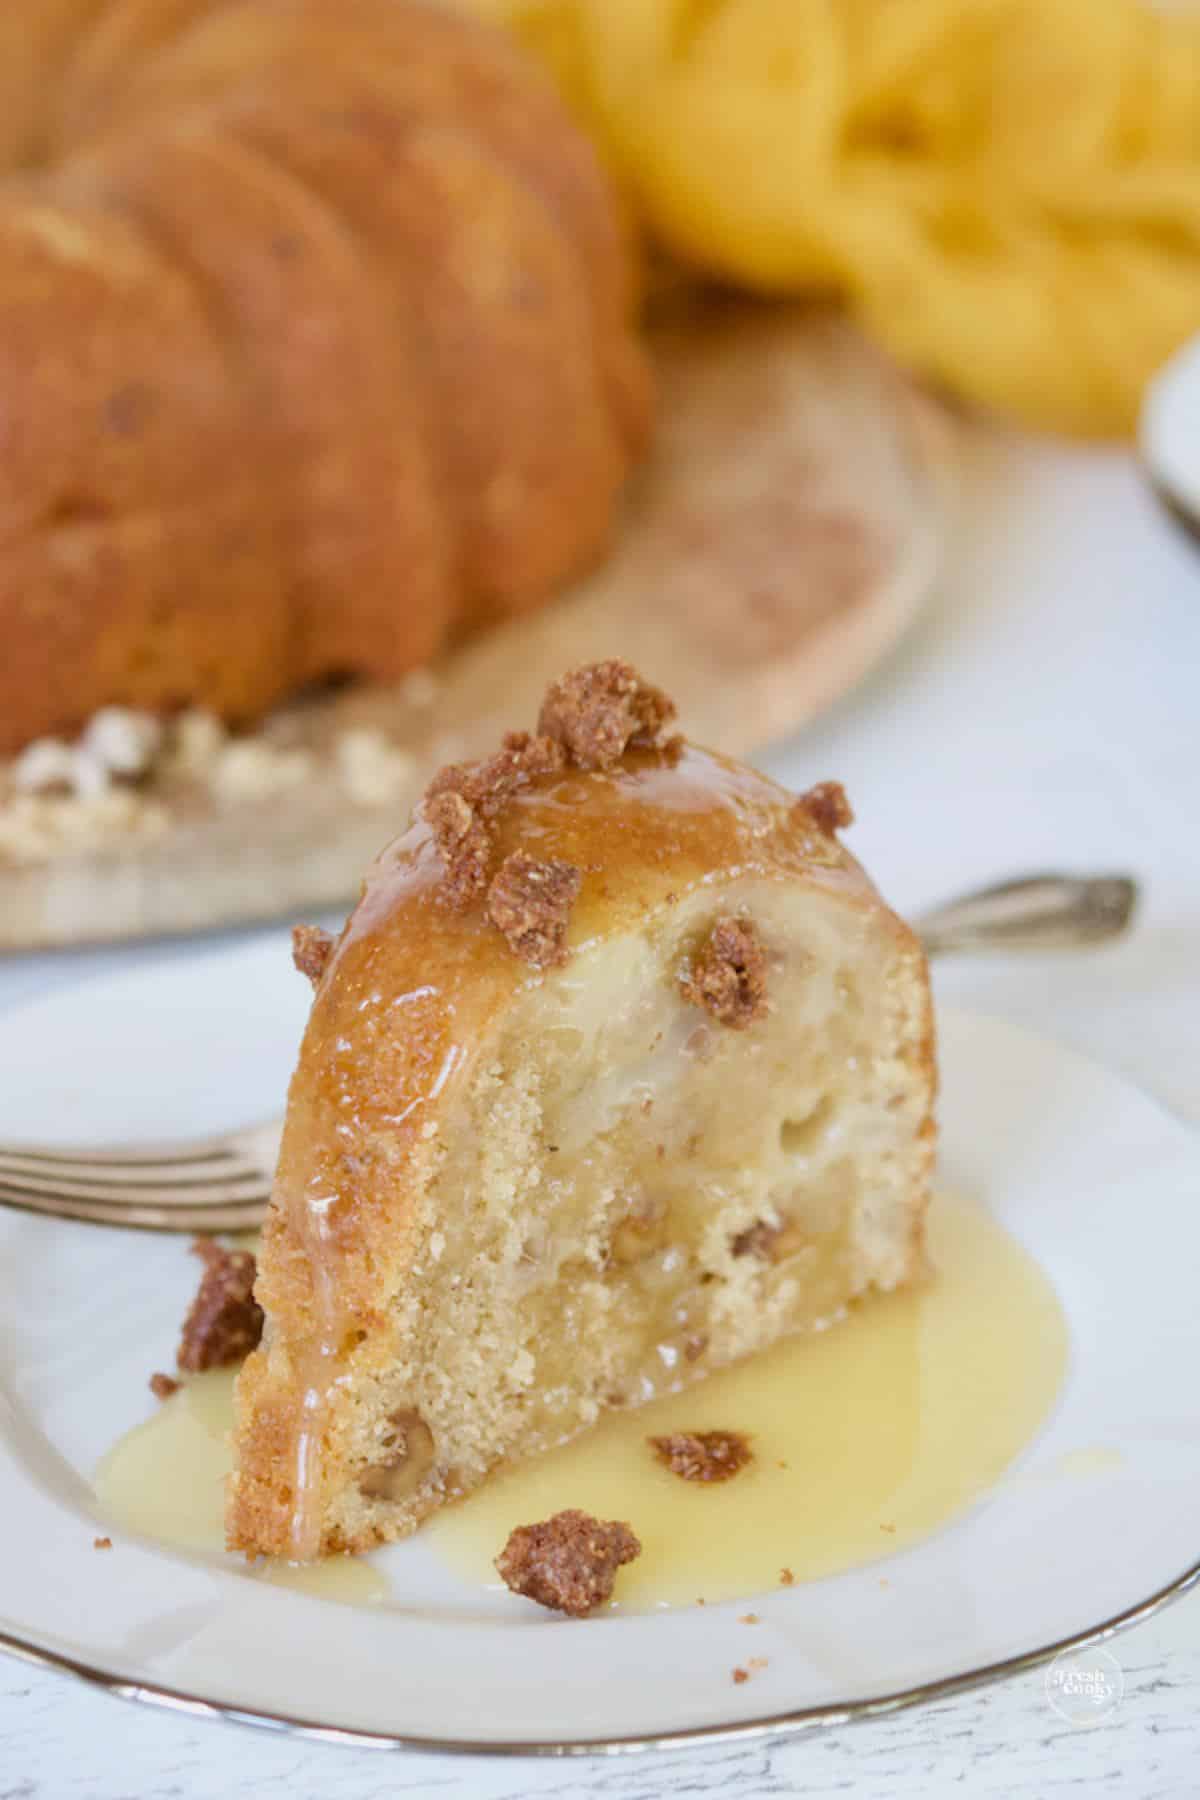 Graham crunch topping on pear bundt cake with vanilla sauce.